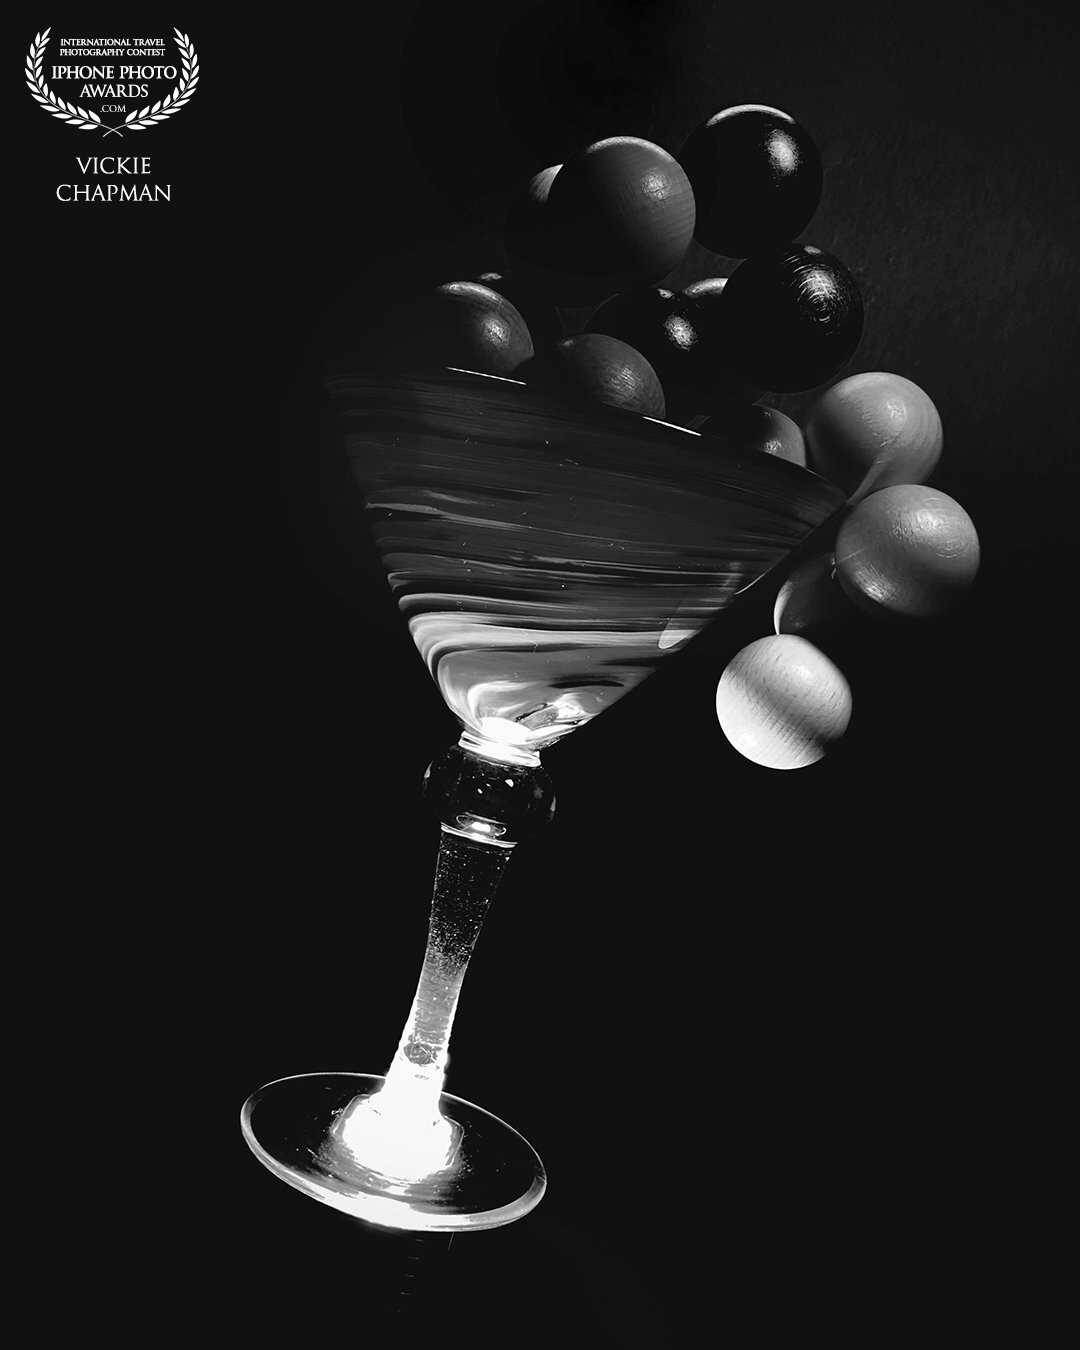 Just a Bit Tipsy <br />
This is  from the martini glass series. Photographed originally in color as a high contrast still life. Shot on iPhone 11Pro Max